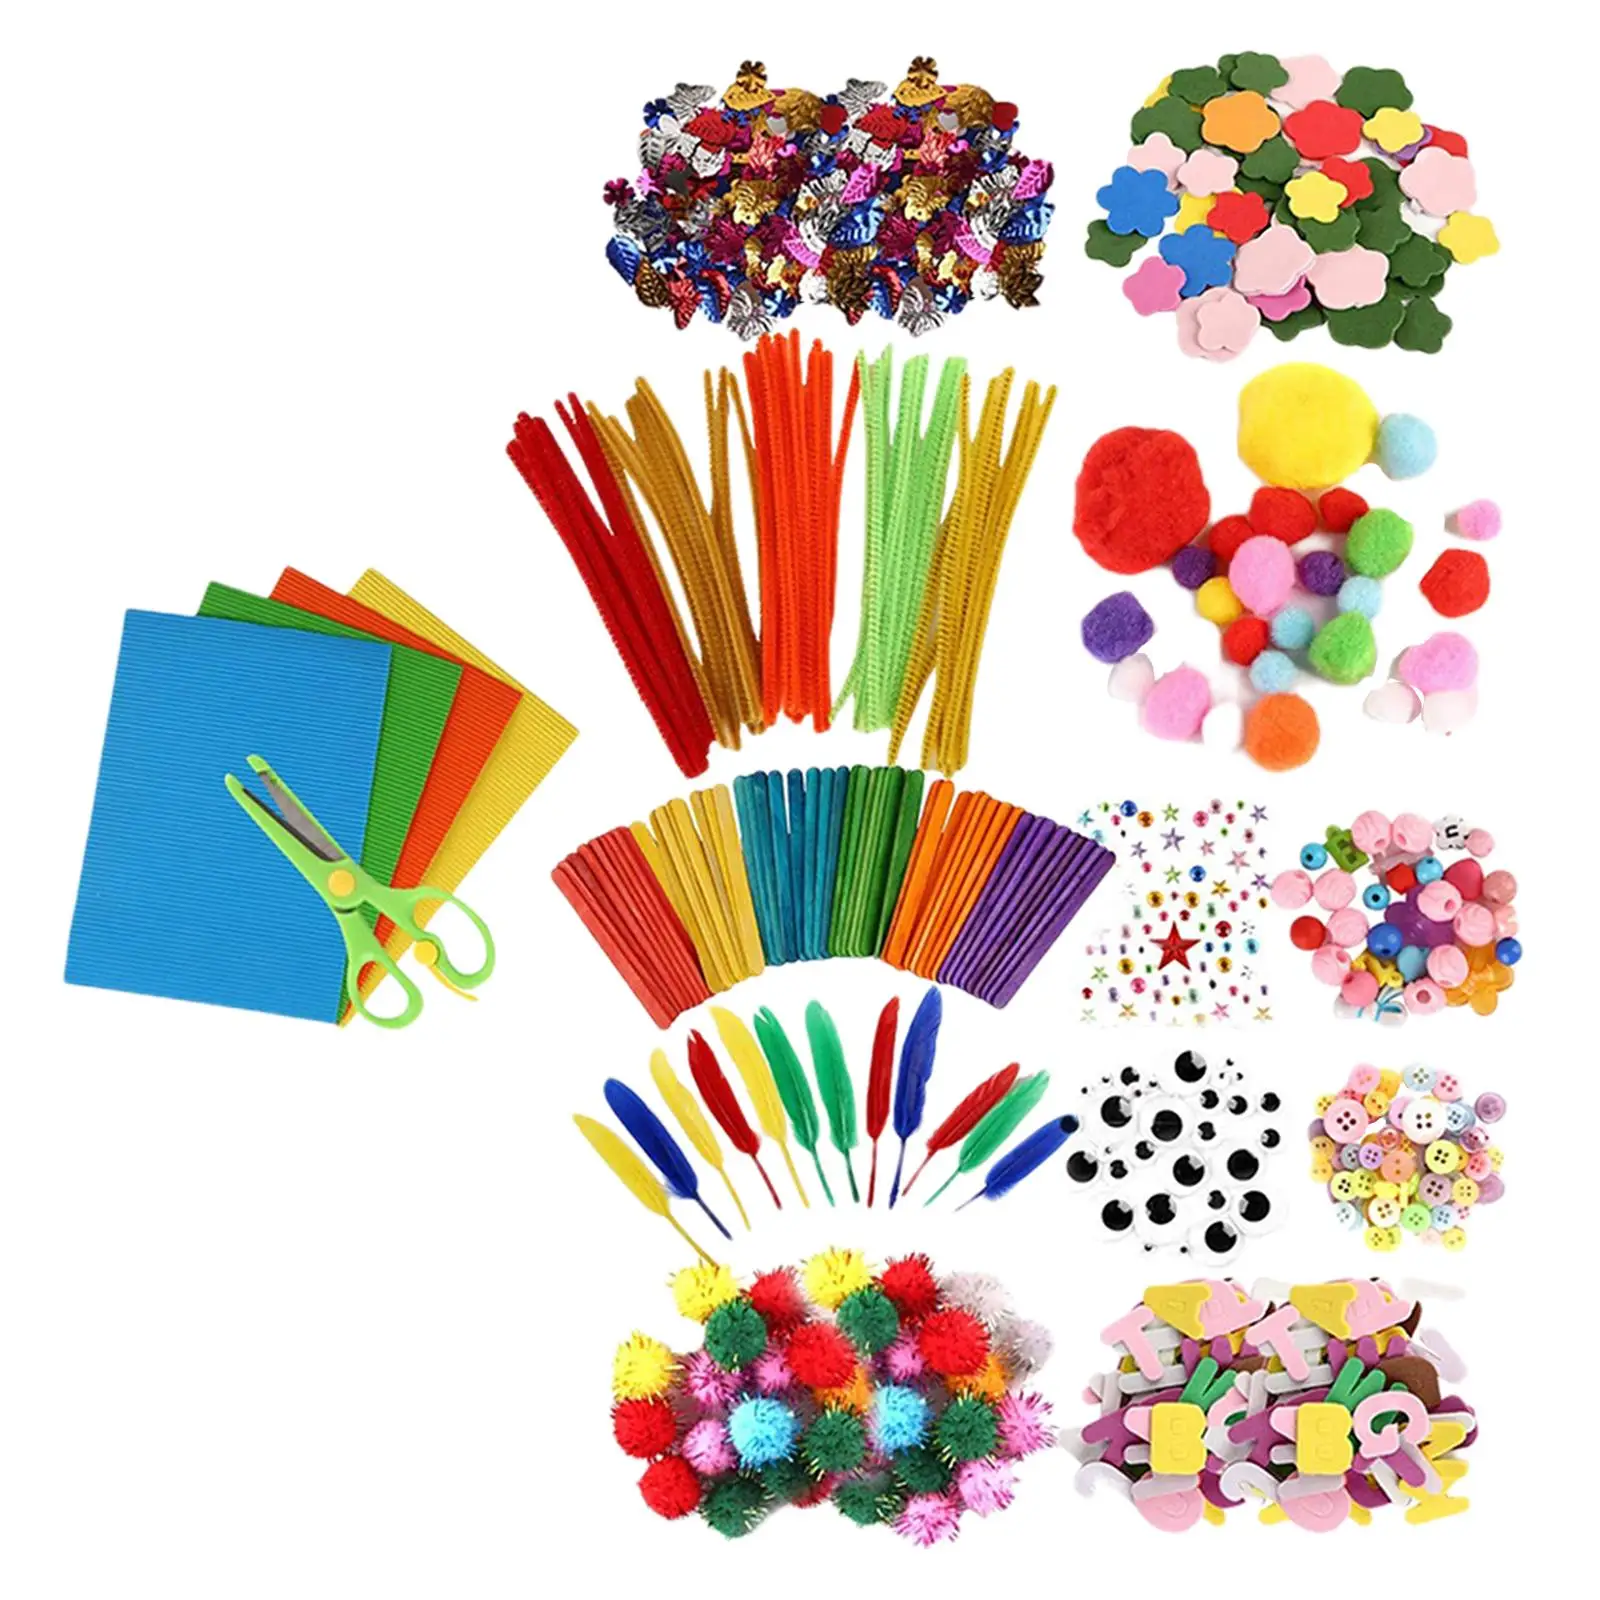 500 Pieces Kids Art & Craft Supplies Assortment Set Pipe Cleaners Craft Kit for Boys Girls